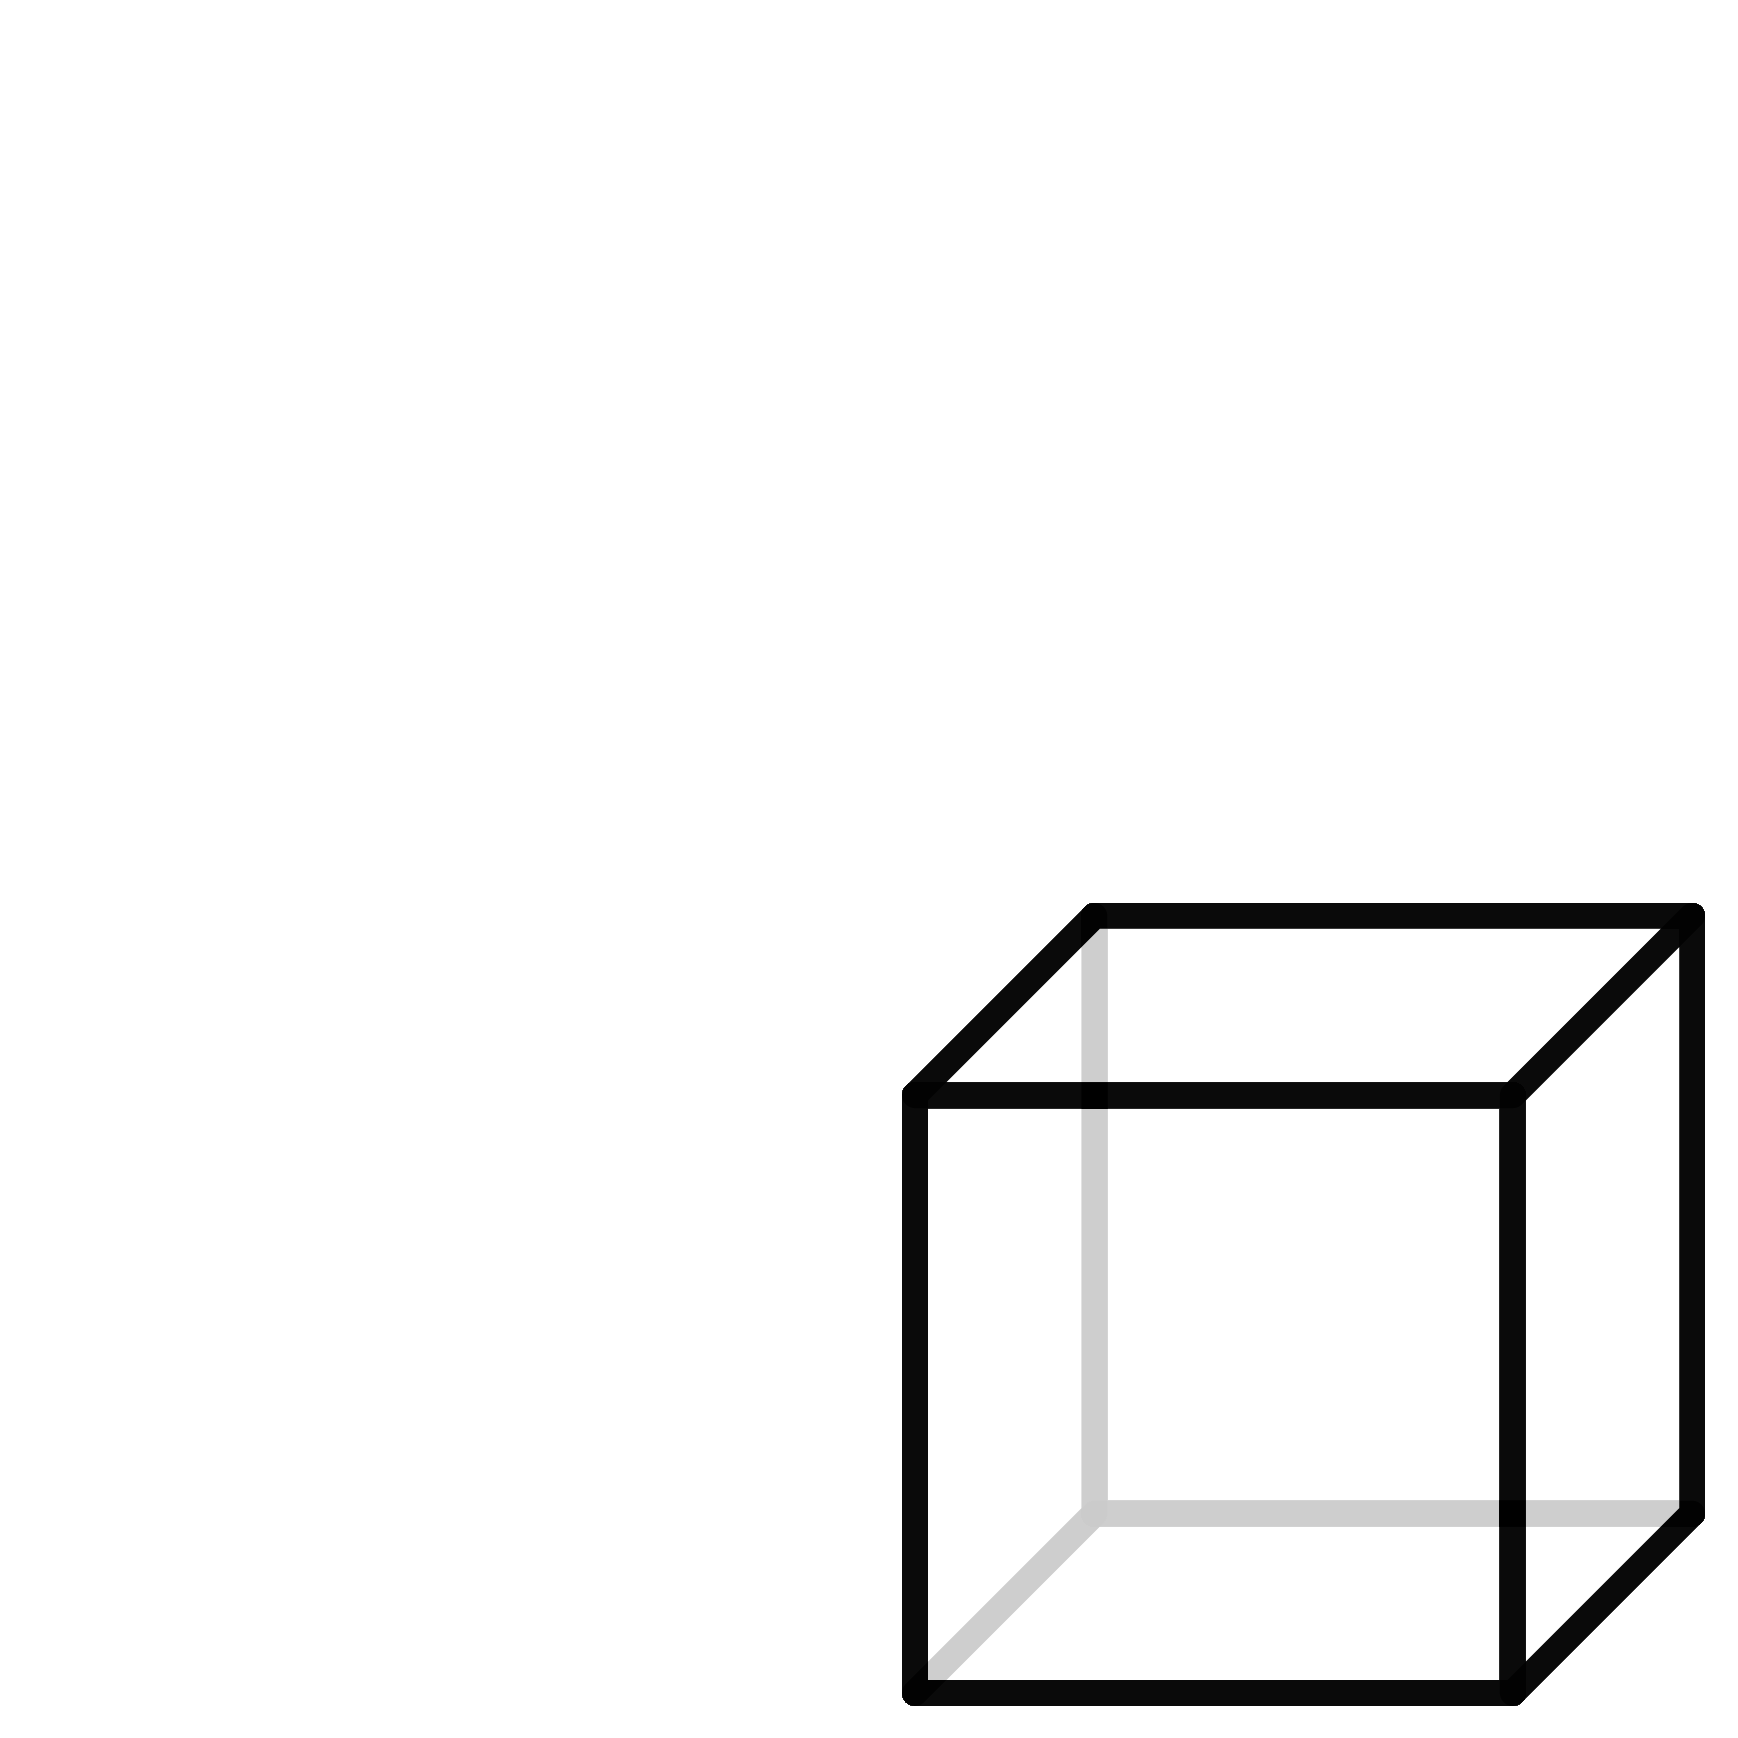 A small cube.